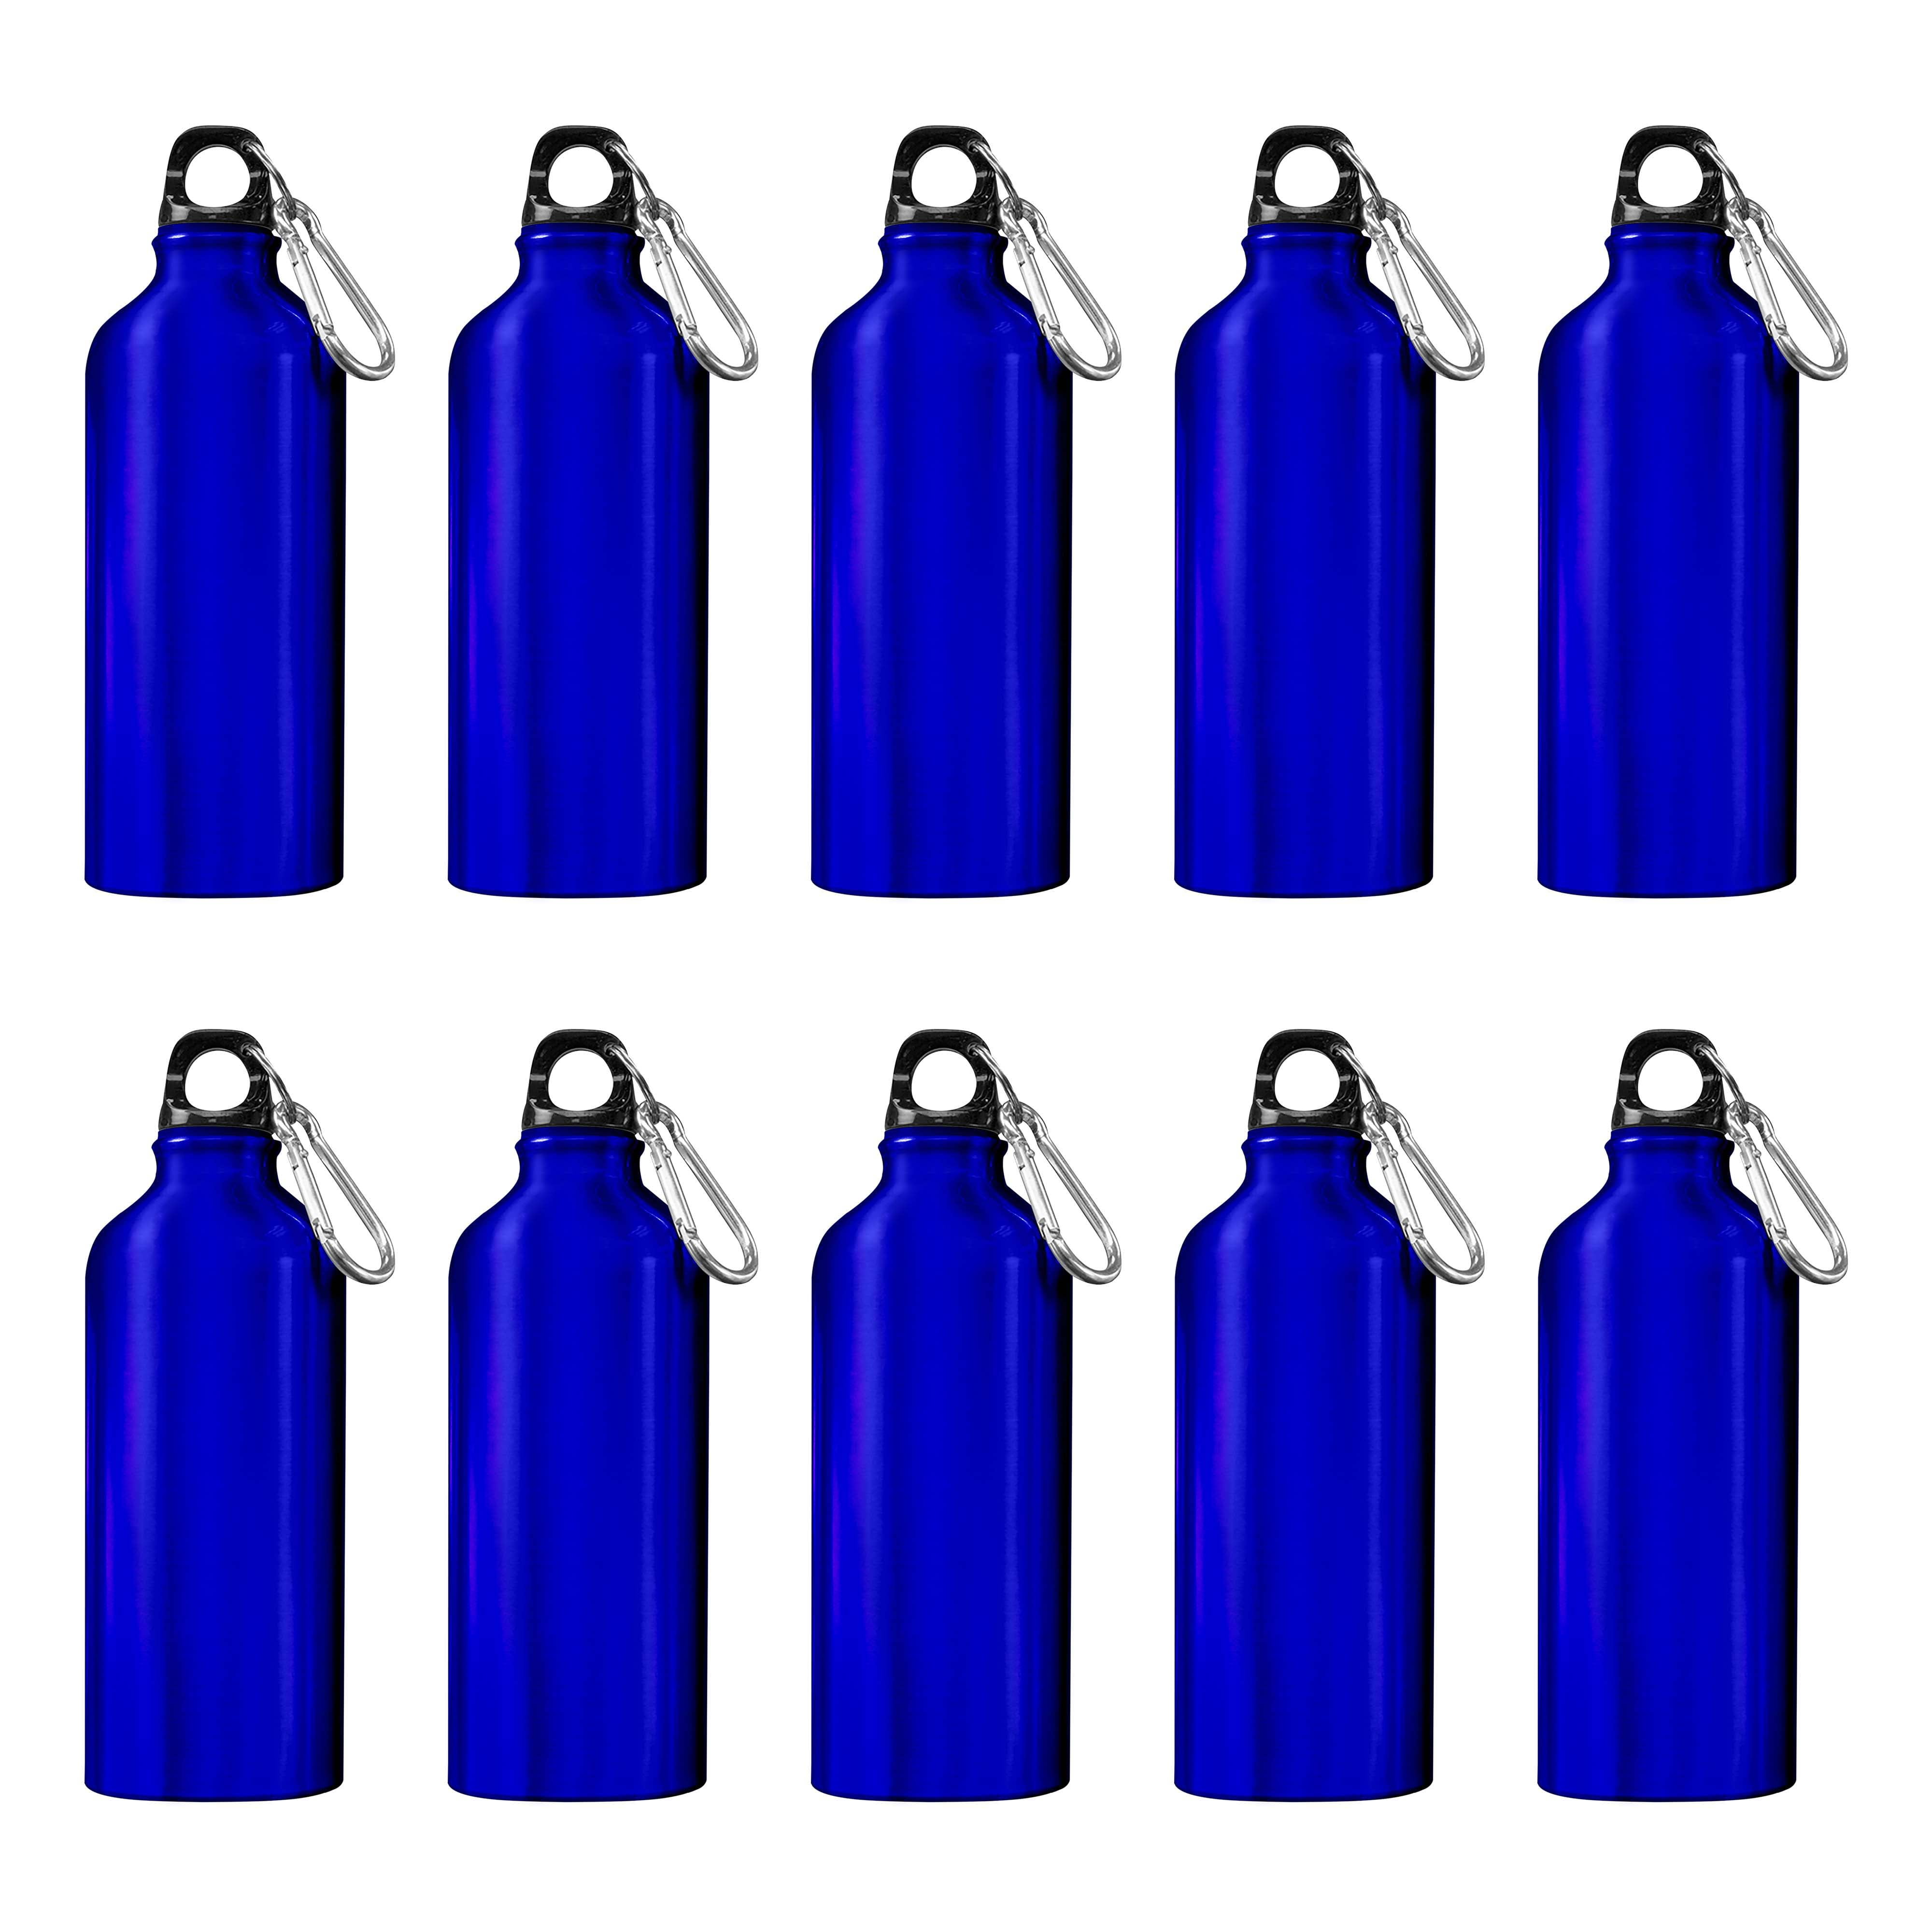 Lot Durable And Lightweight Aluminium Water Bottle With Carabiner